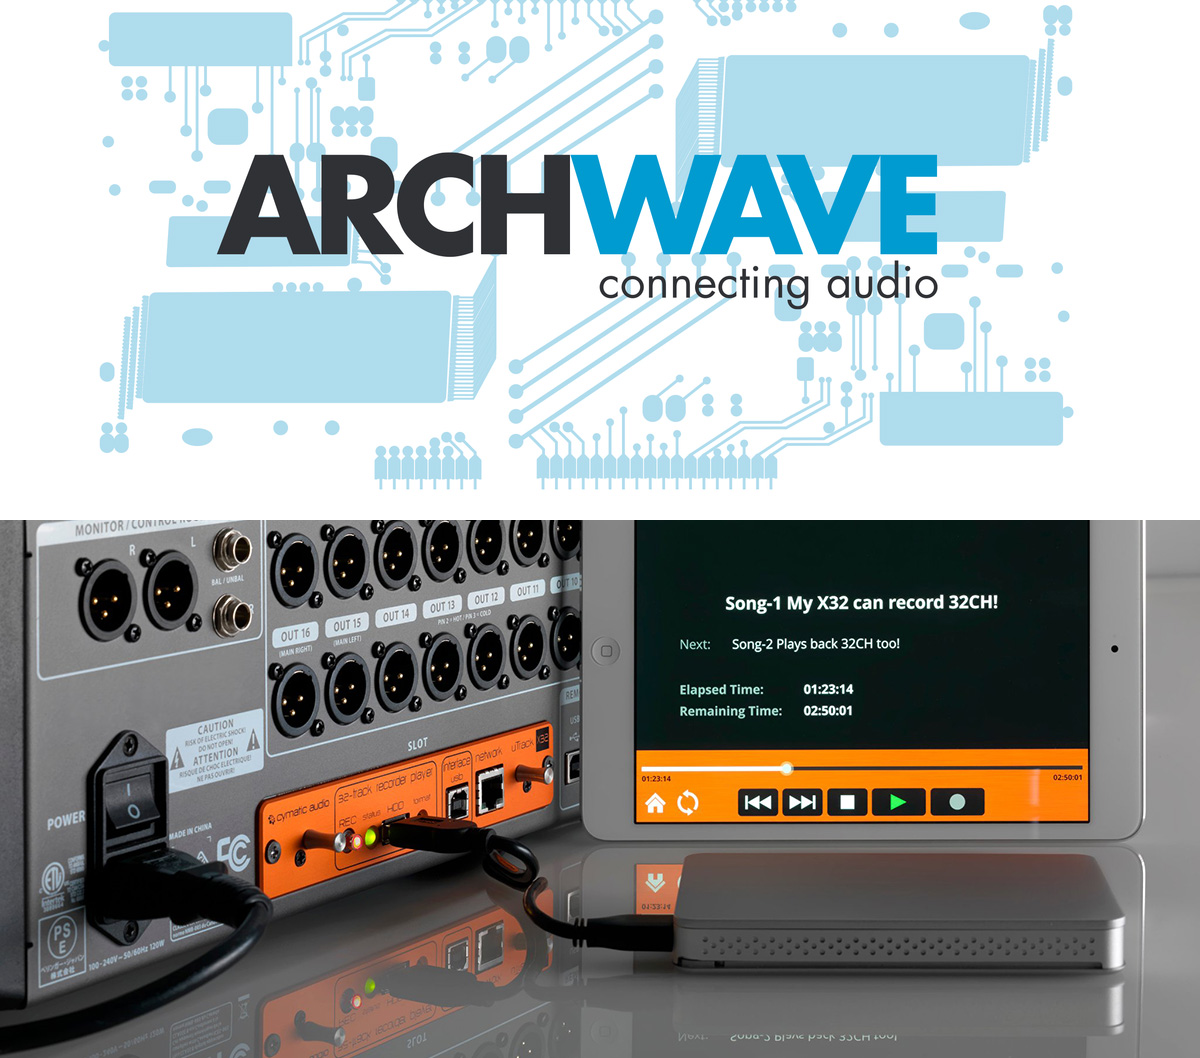 Riedel Acquires Archwave and Cymatic Audio and Creates Zurich IP Engineering Hub